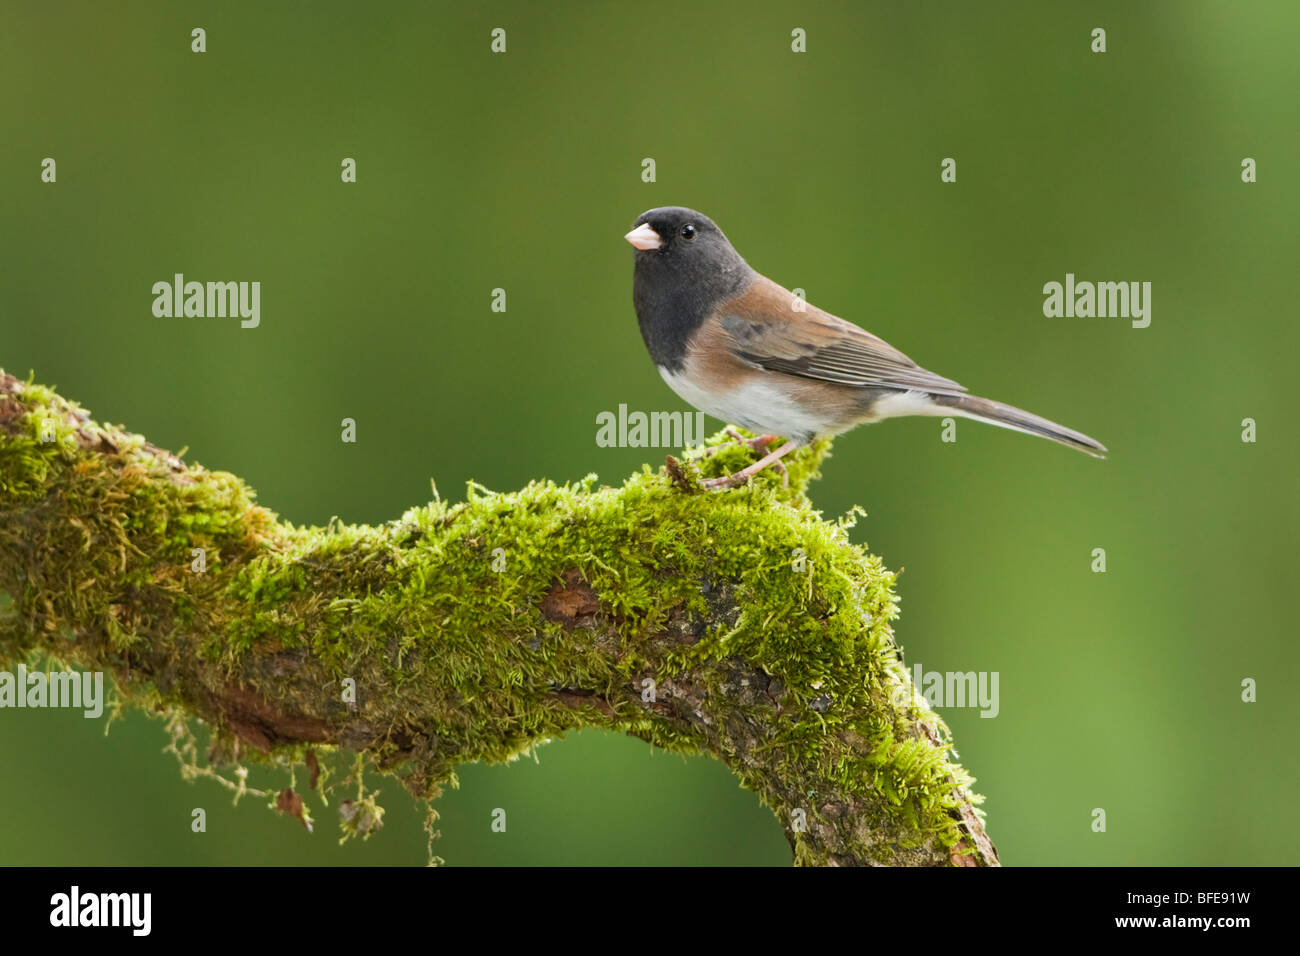 A Dark-eyed junco (Junco hyemalis) perches on a mossy branch in Victoria, Vancouver Island, British Columbia, Canada Stock Photo